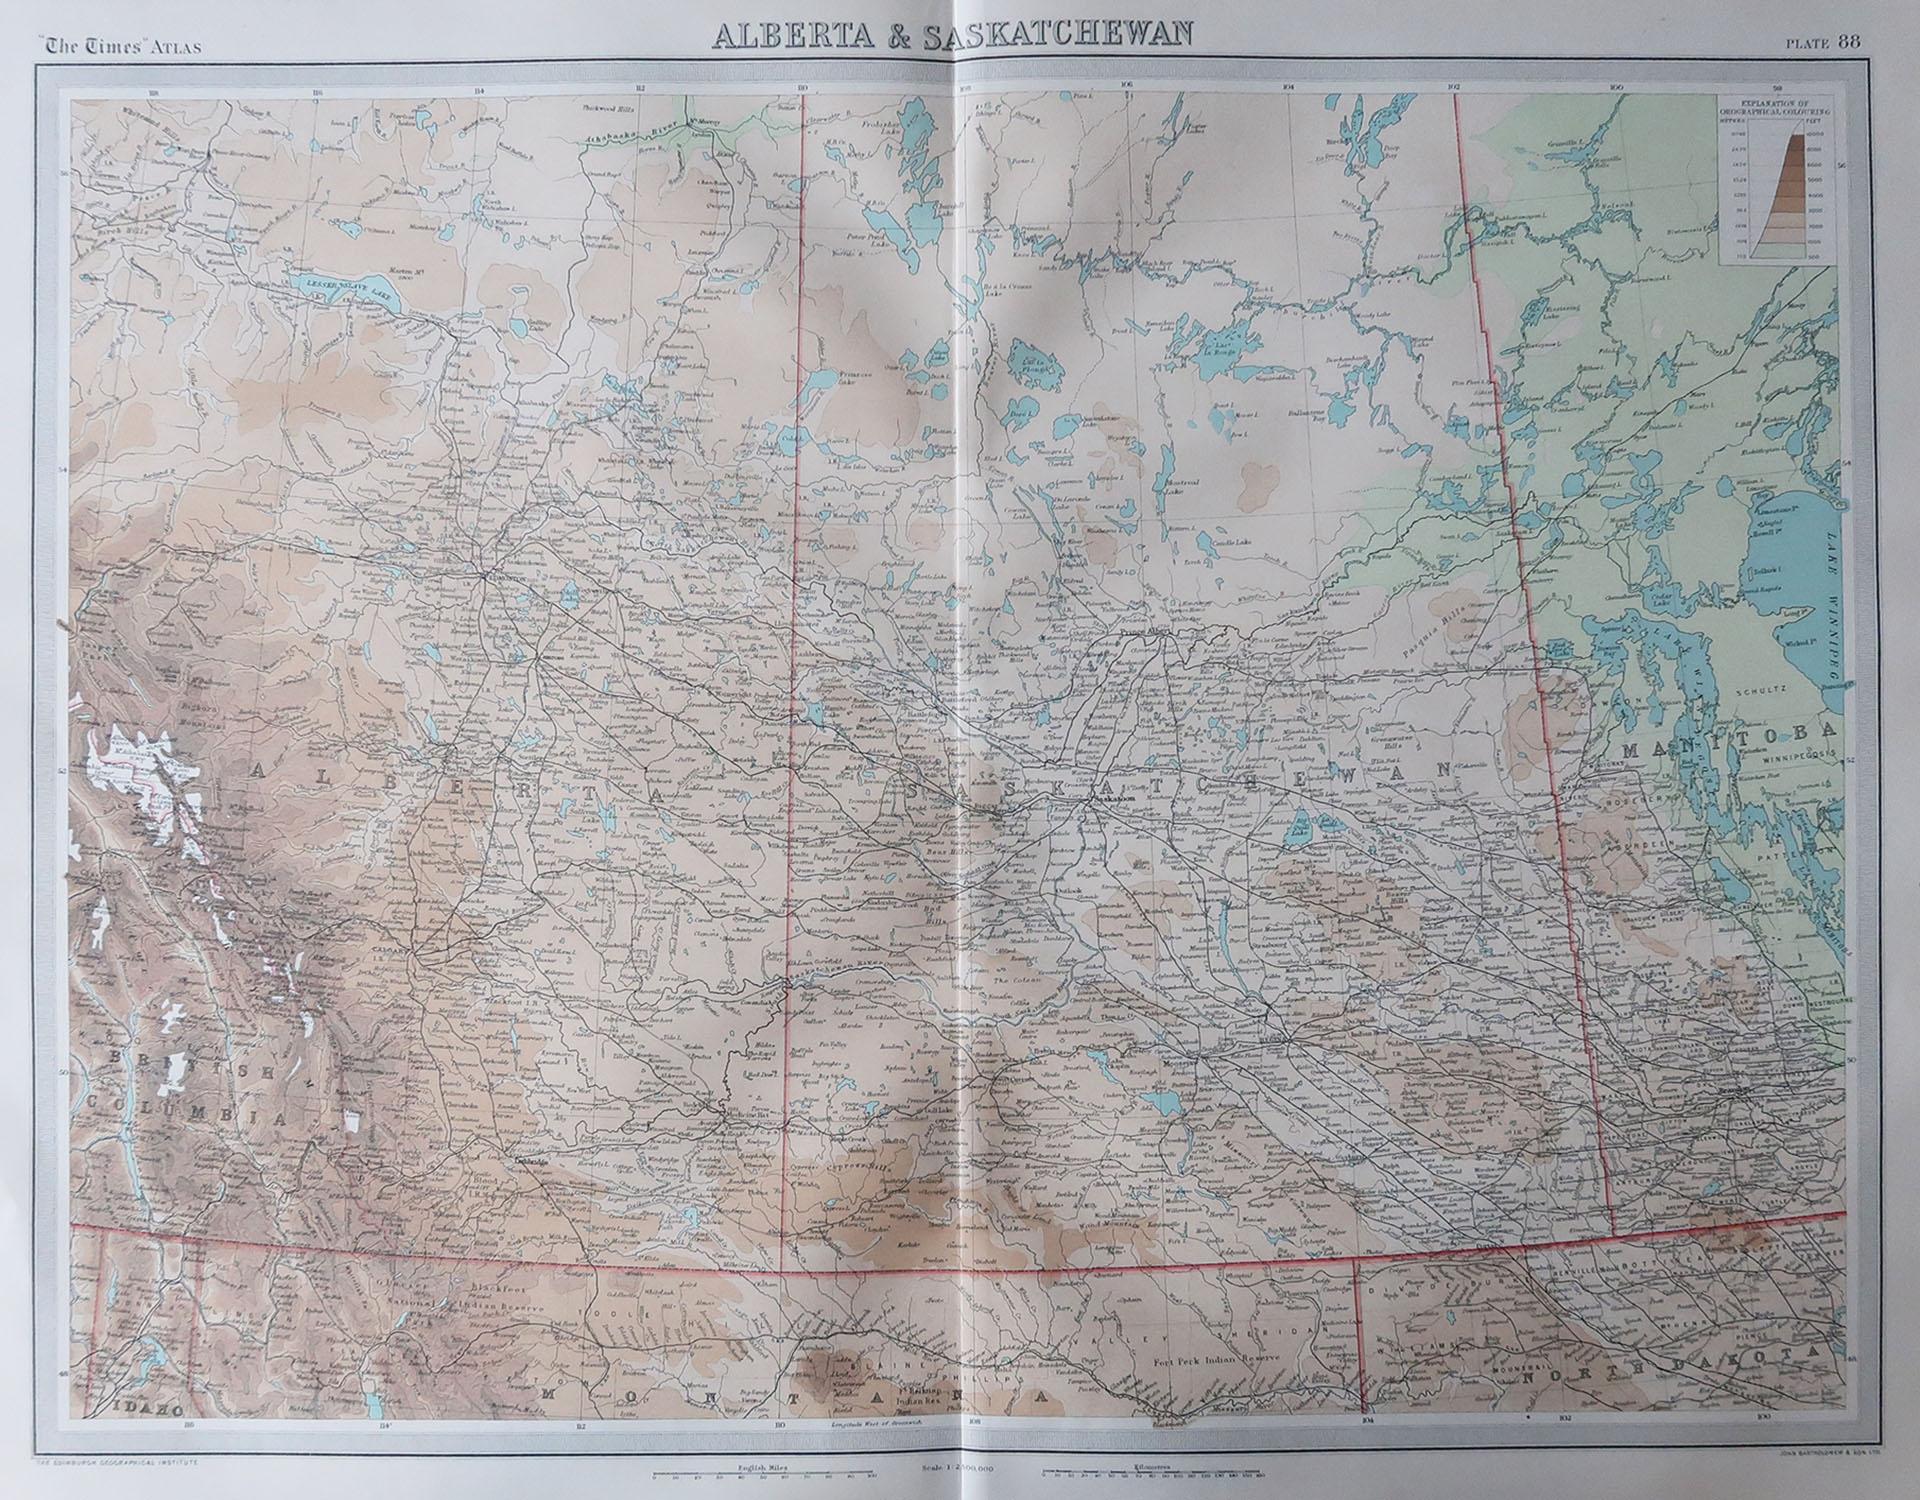 Great maps of Alberta and Saskatchewan

Unframed

Original color

By John Bartholomew and Co. Edinburgh Geographical Institute

Published, circa 1920

Free shipping.
 